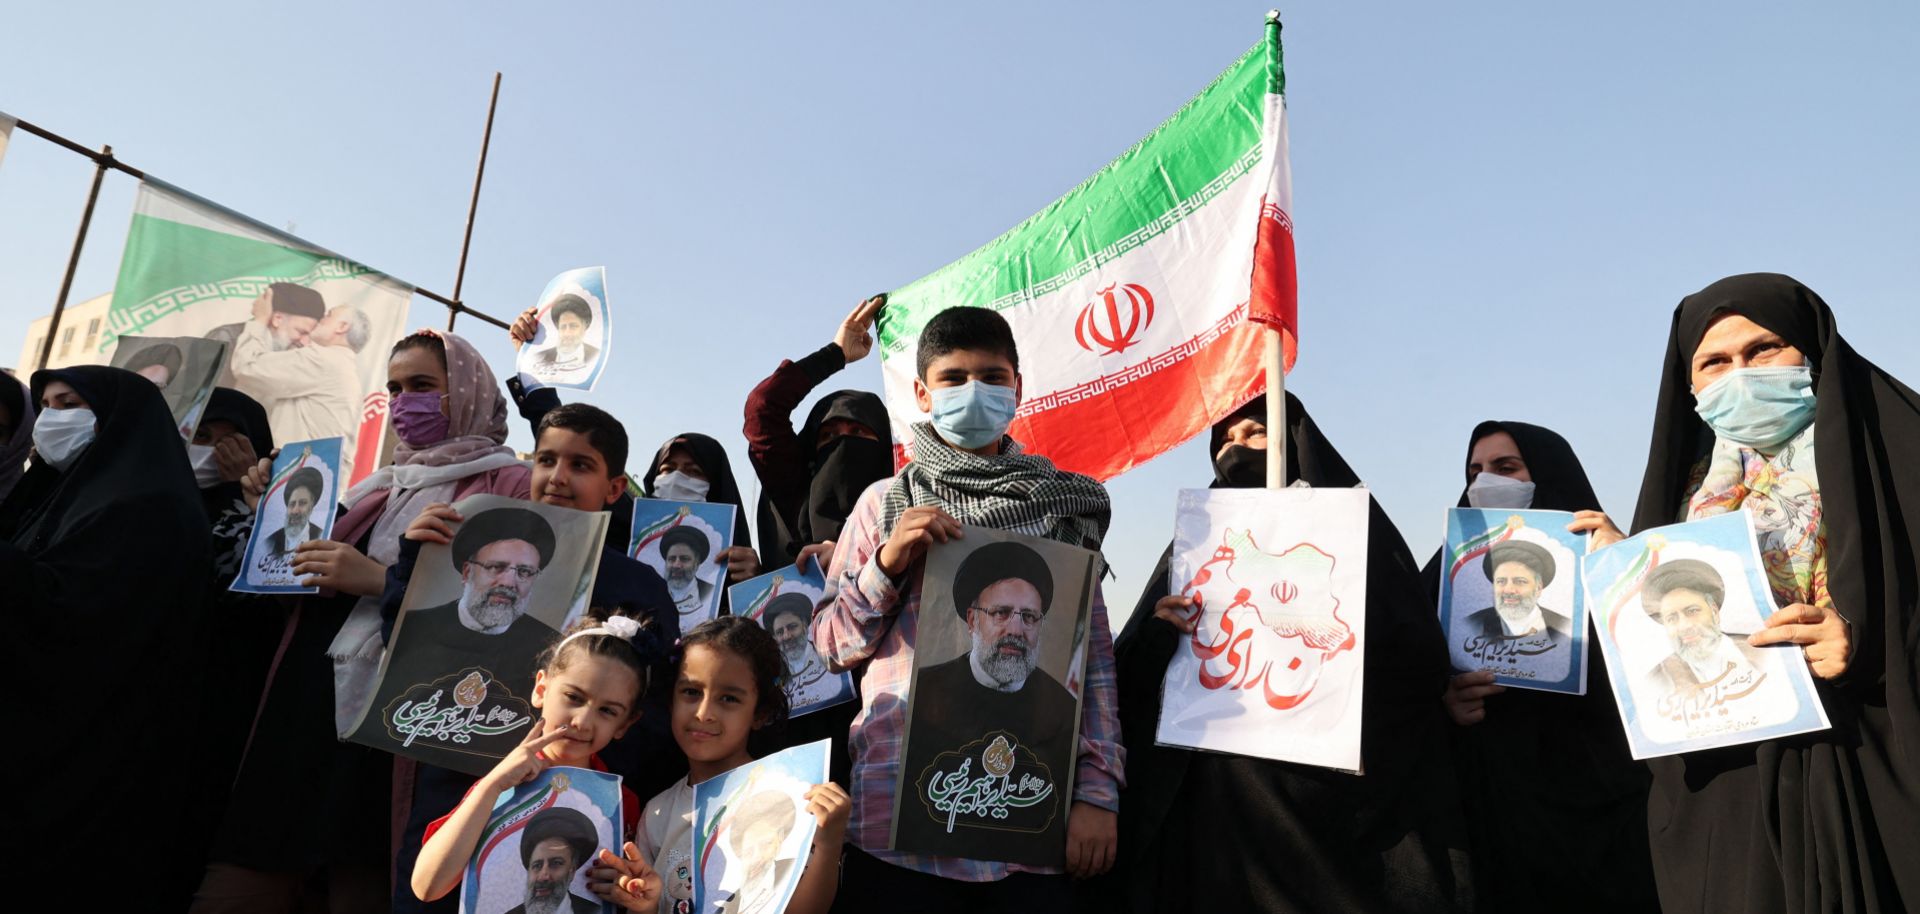 Supporters of Iranian presidential candidate Ebrahim Raisi hold campaign posters at a rally in Tehran on June 14, 2021. 